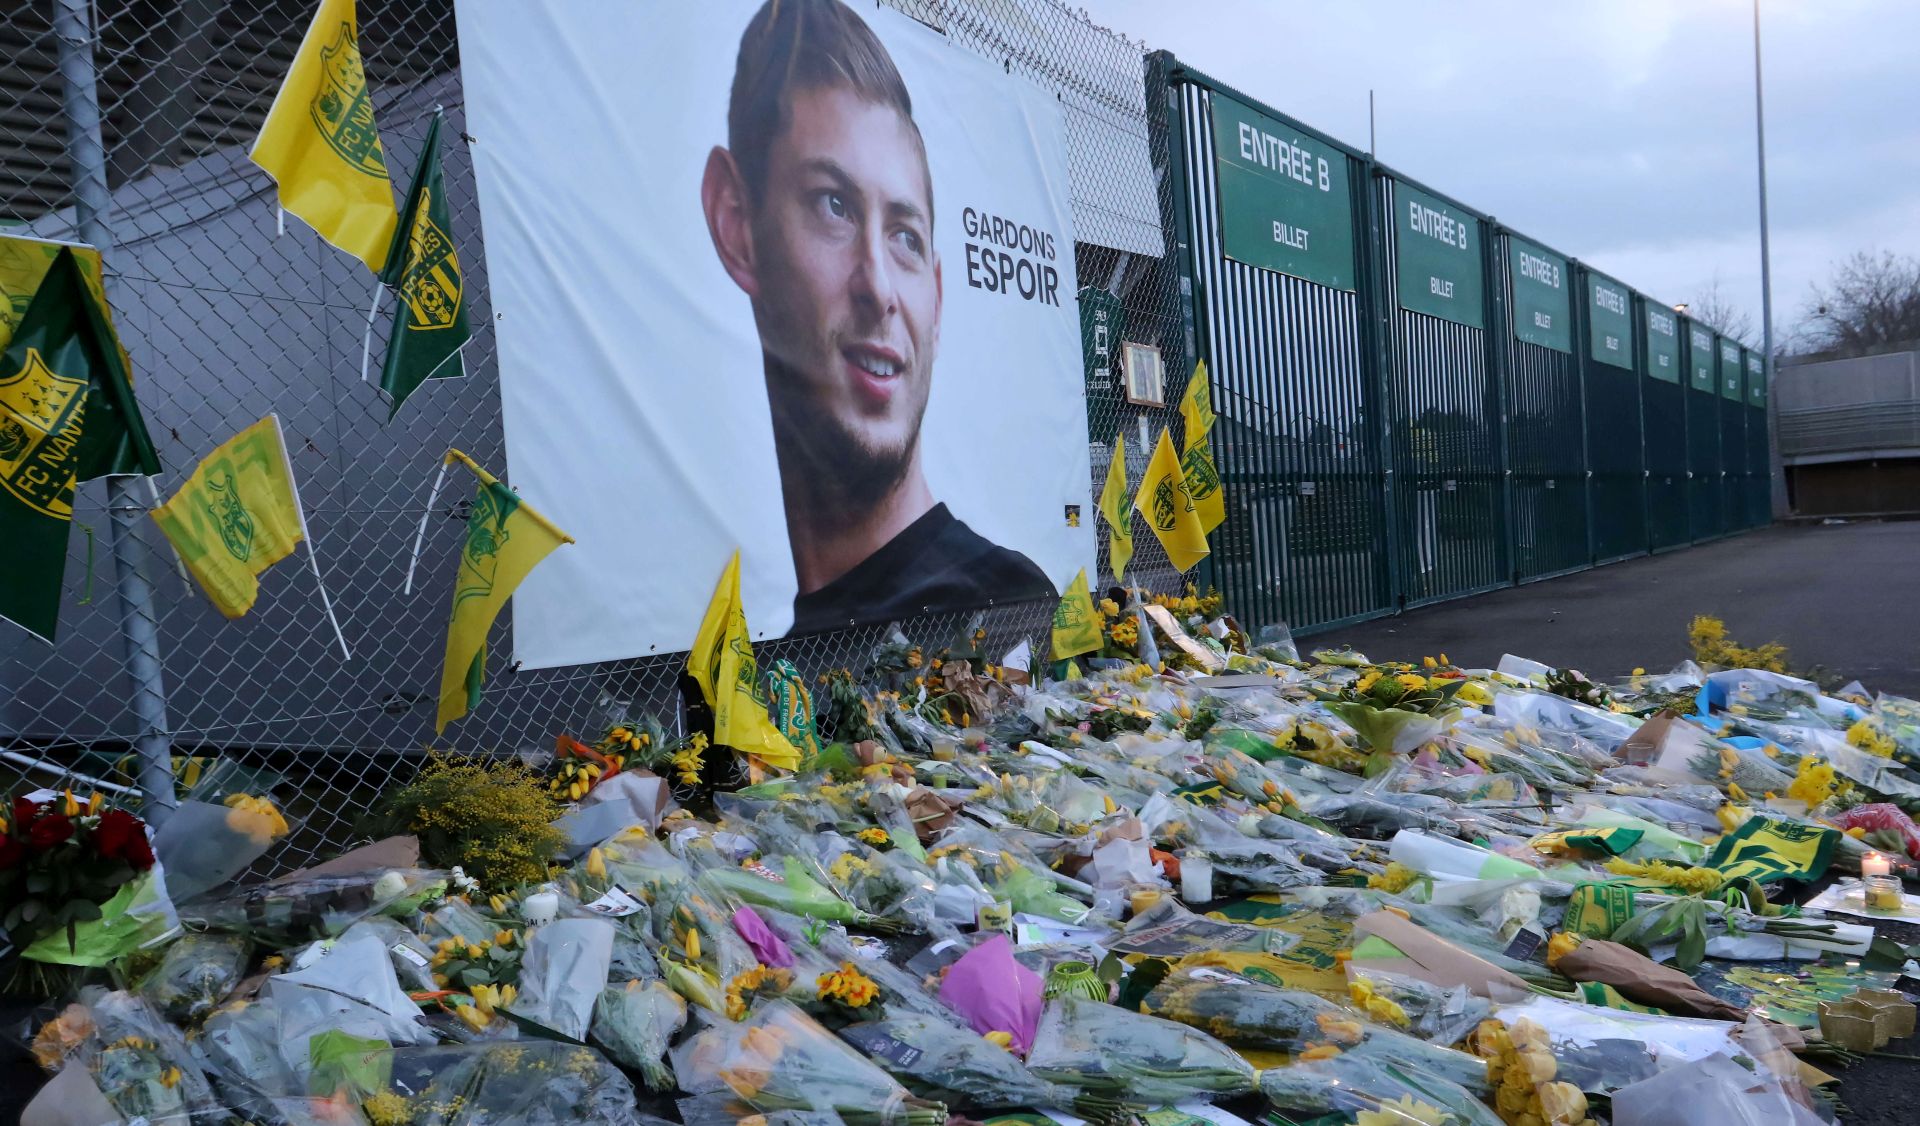 epa07331999 FC Nantes supporters display tributes on the grids of the stadium for Argentinian soccer player Emiliano Sala, ahead of the French League 1 soccer match between Nantes and Saint Etienne at the La Beaujoire stadium in Nantes, France, 30 January 2019. Emiliano Sala went missing on 21 January 2019 after a light aicraft he was travelling in from Nantes to Cardiff disapeared over the English Channel.  EPA/EDWARD BOONE